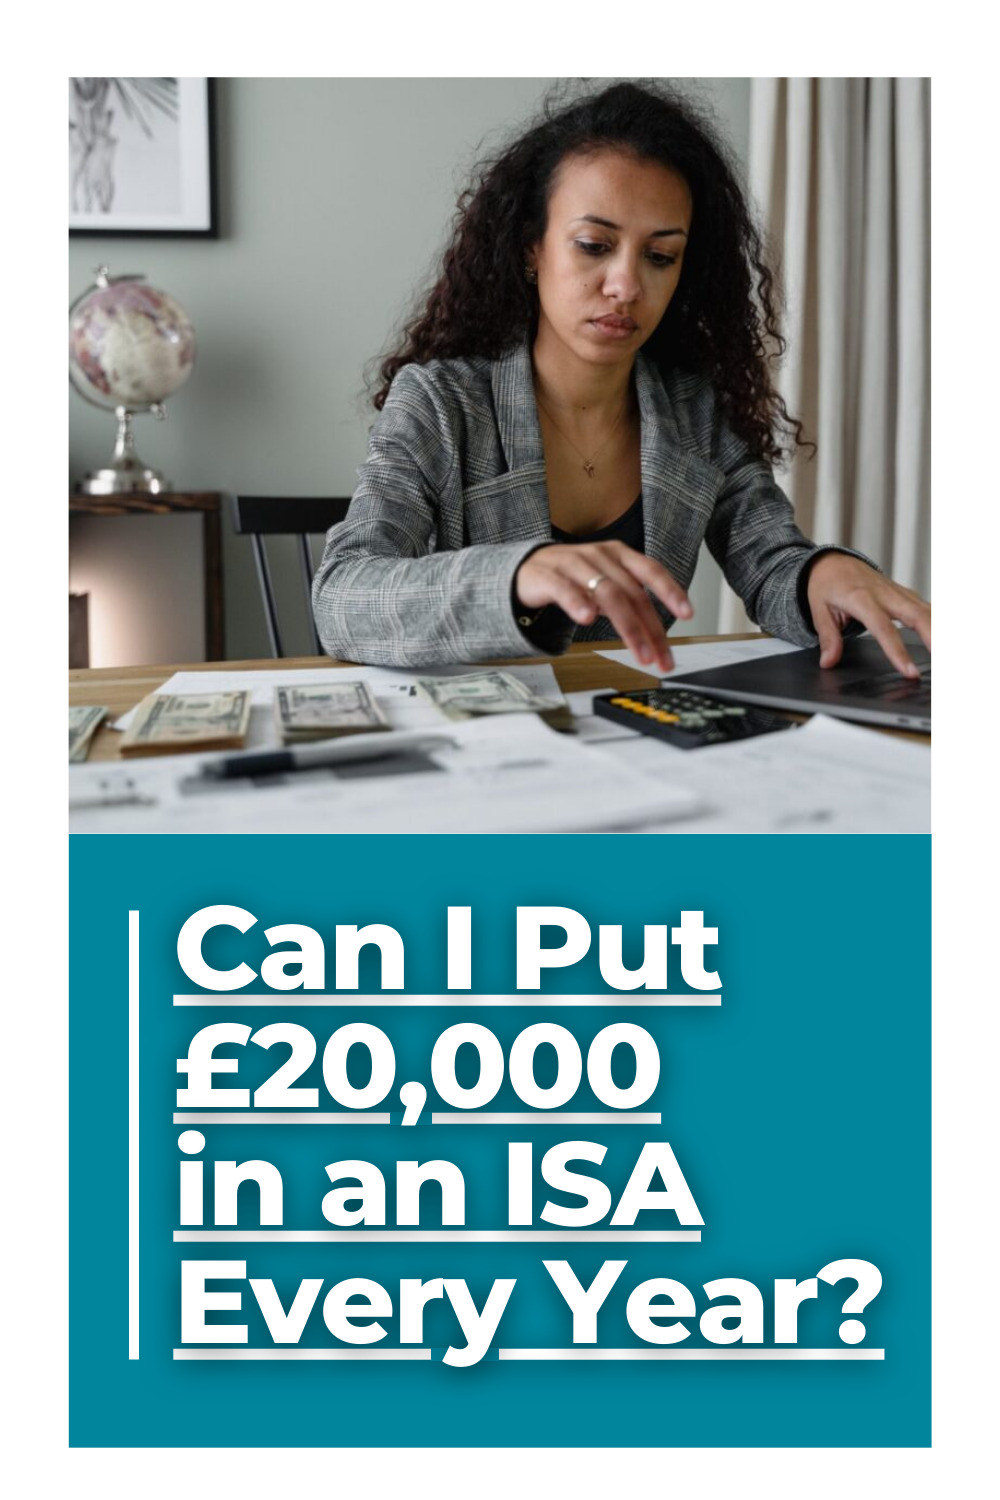 Can I Put £20,000 in an ISA Every Year?